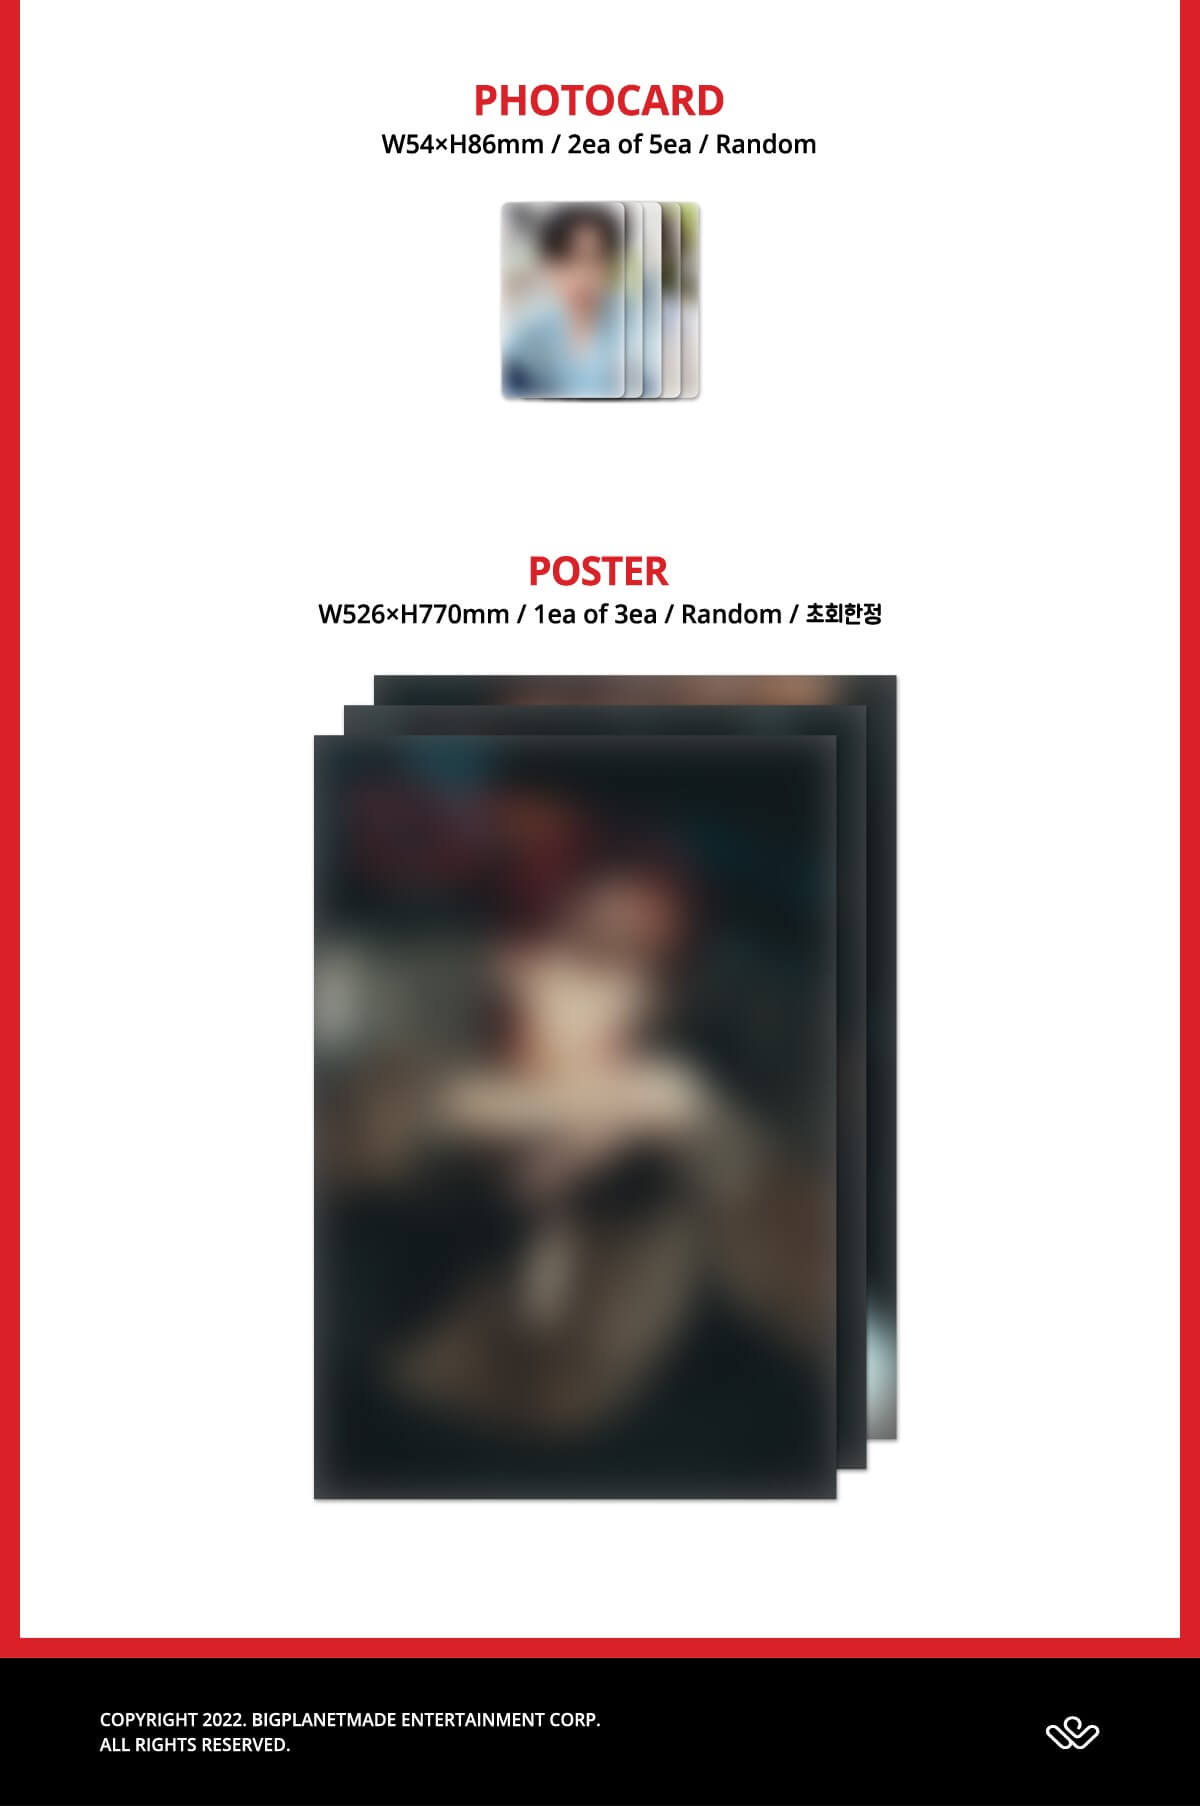 Ha Sung Woon Strange World (Jewel Case) Inclusions Photocards 1st Press Only Poster